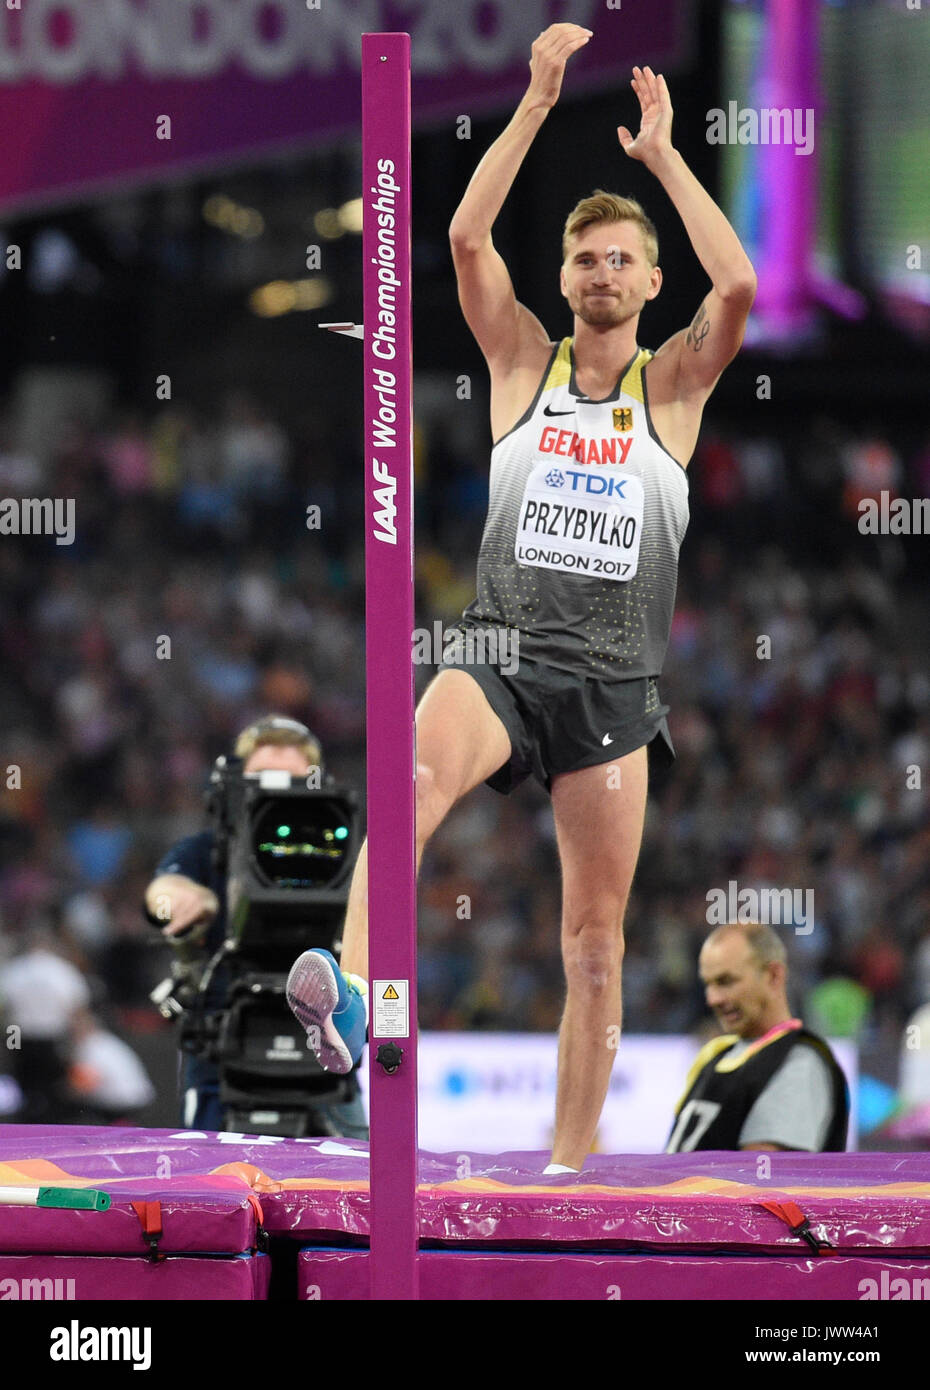 London, UK. 13th Aug, 2017. Germany's Mateusz Przybylko thanks the spectators after his failed attempt at high jump at the IAAF London 2017 World Athletics Championships in London, United Kingdom, 13 August 2017. Photo: Rainer Jensen/dpa/Alamy Live News Stock Photo